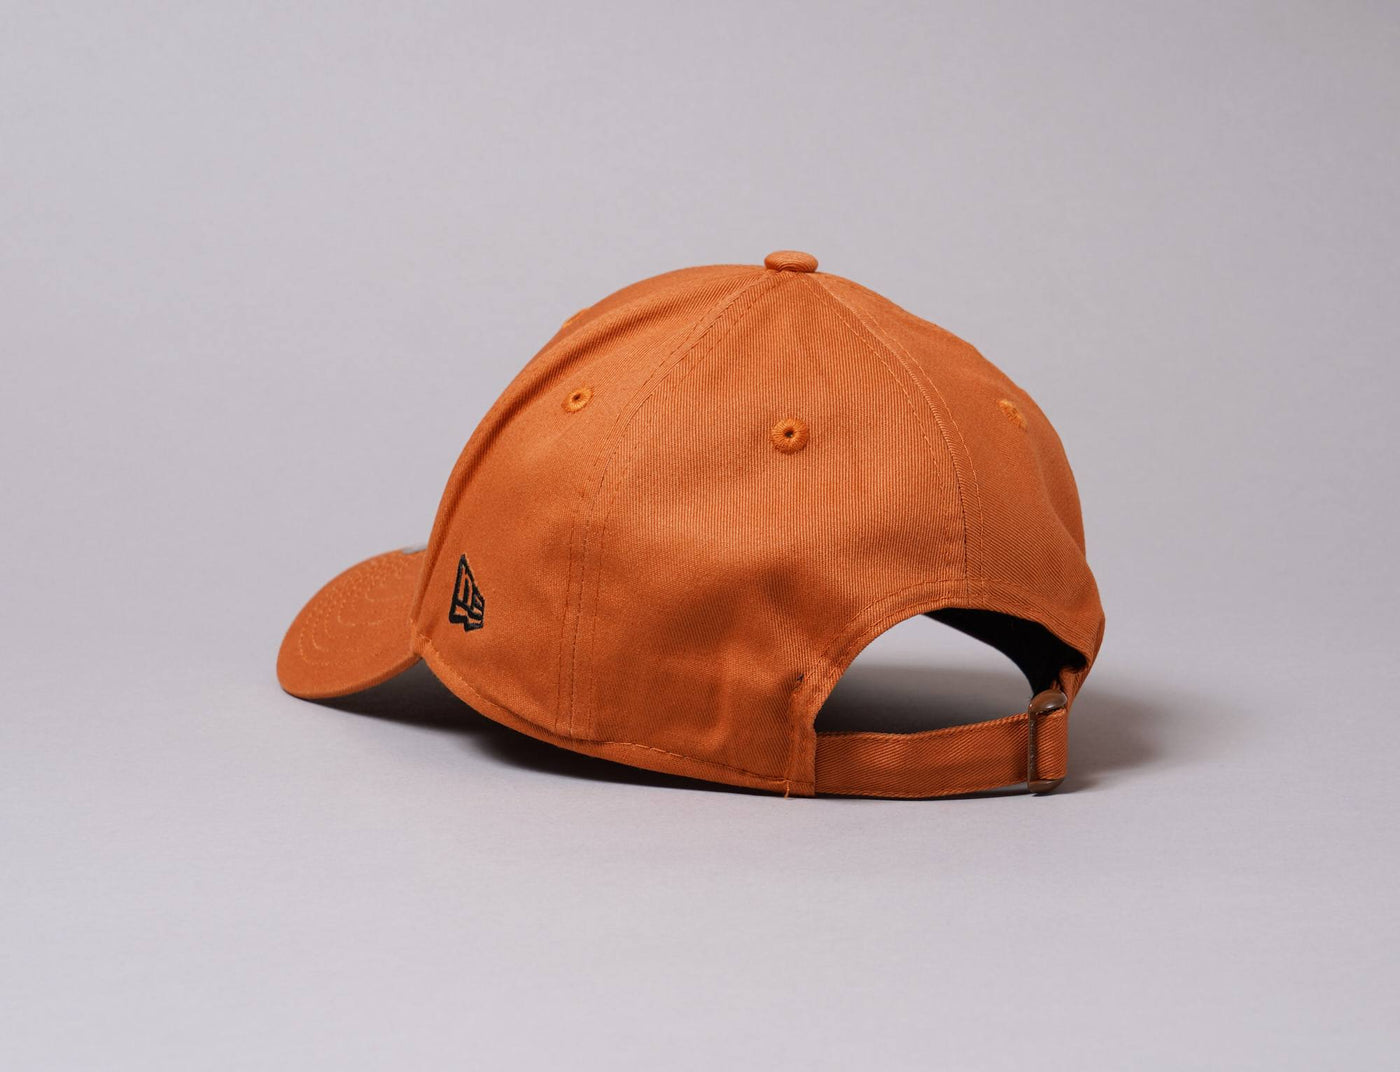 Cap Adjustable Cap Brown 9FORTY Camp Toffee New Era 9FORTY / Brown / One Size (55-60 cm)